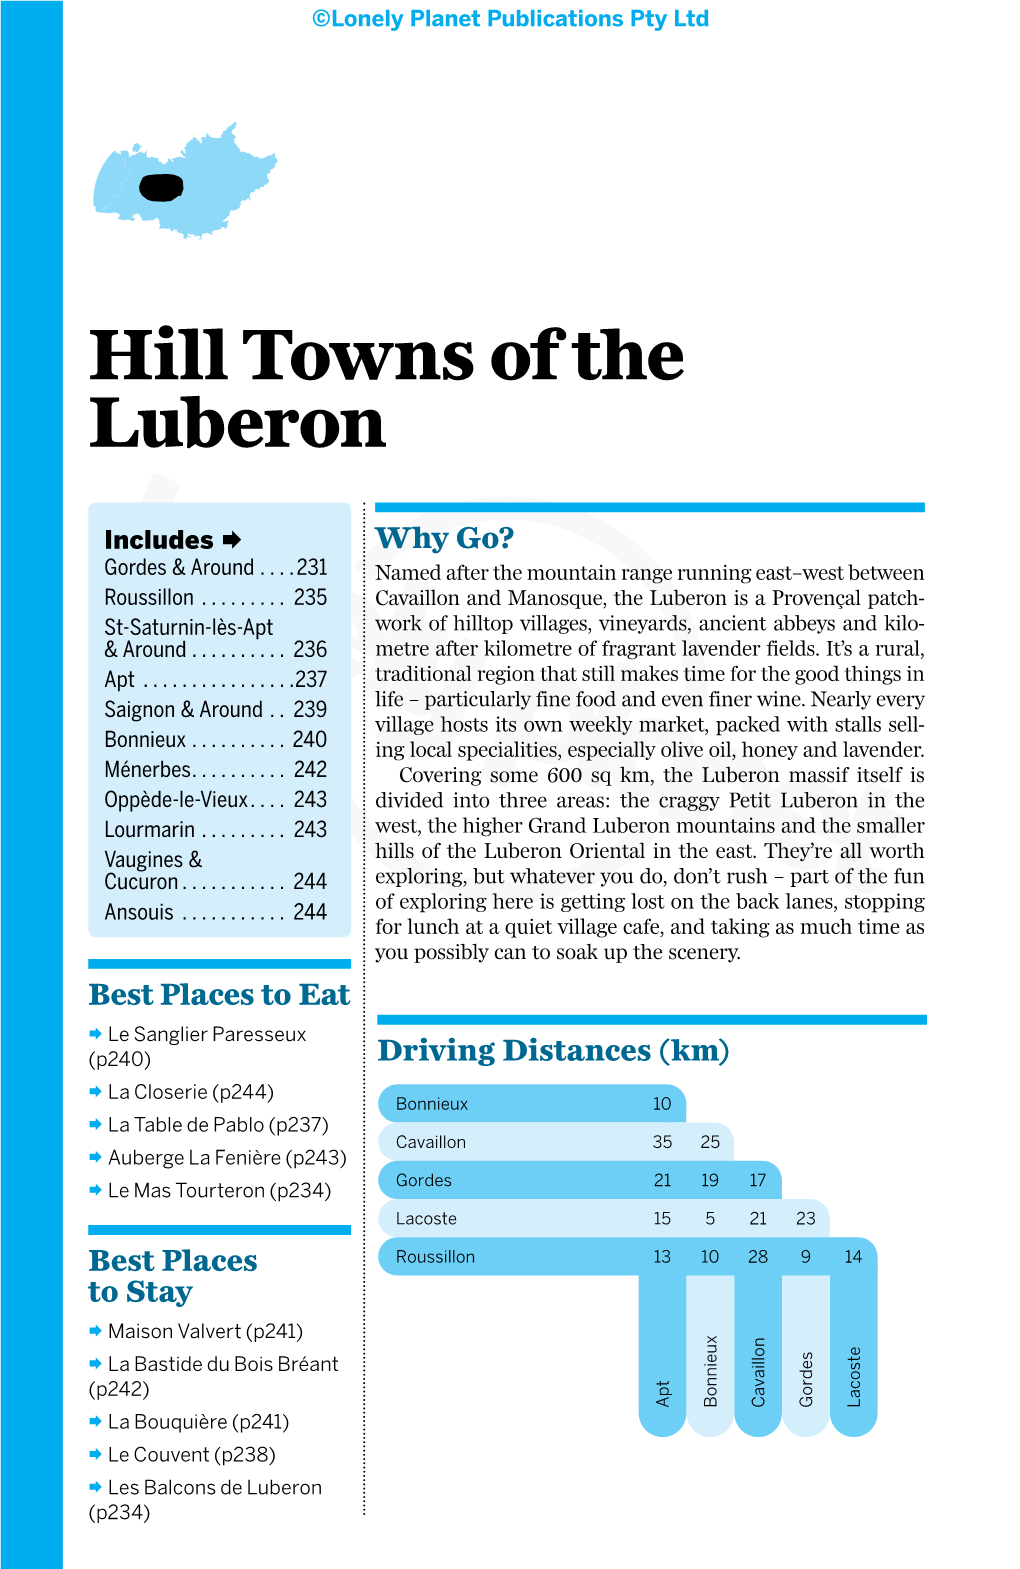 Hill Towns of the Luberon